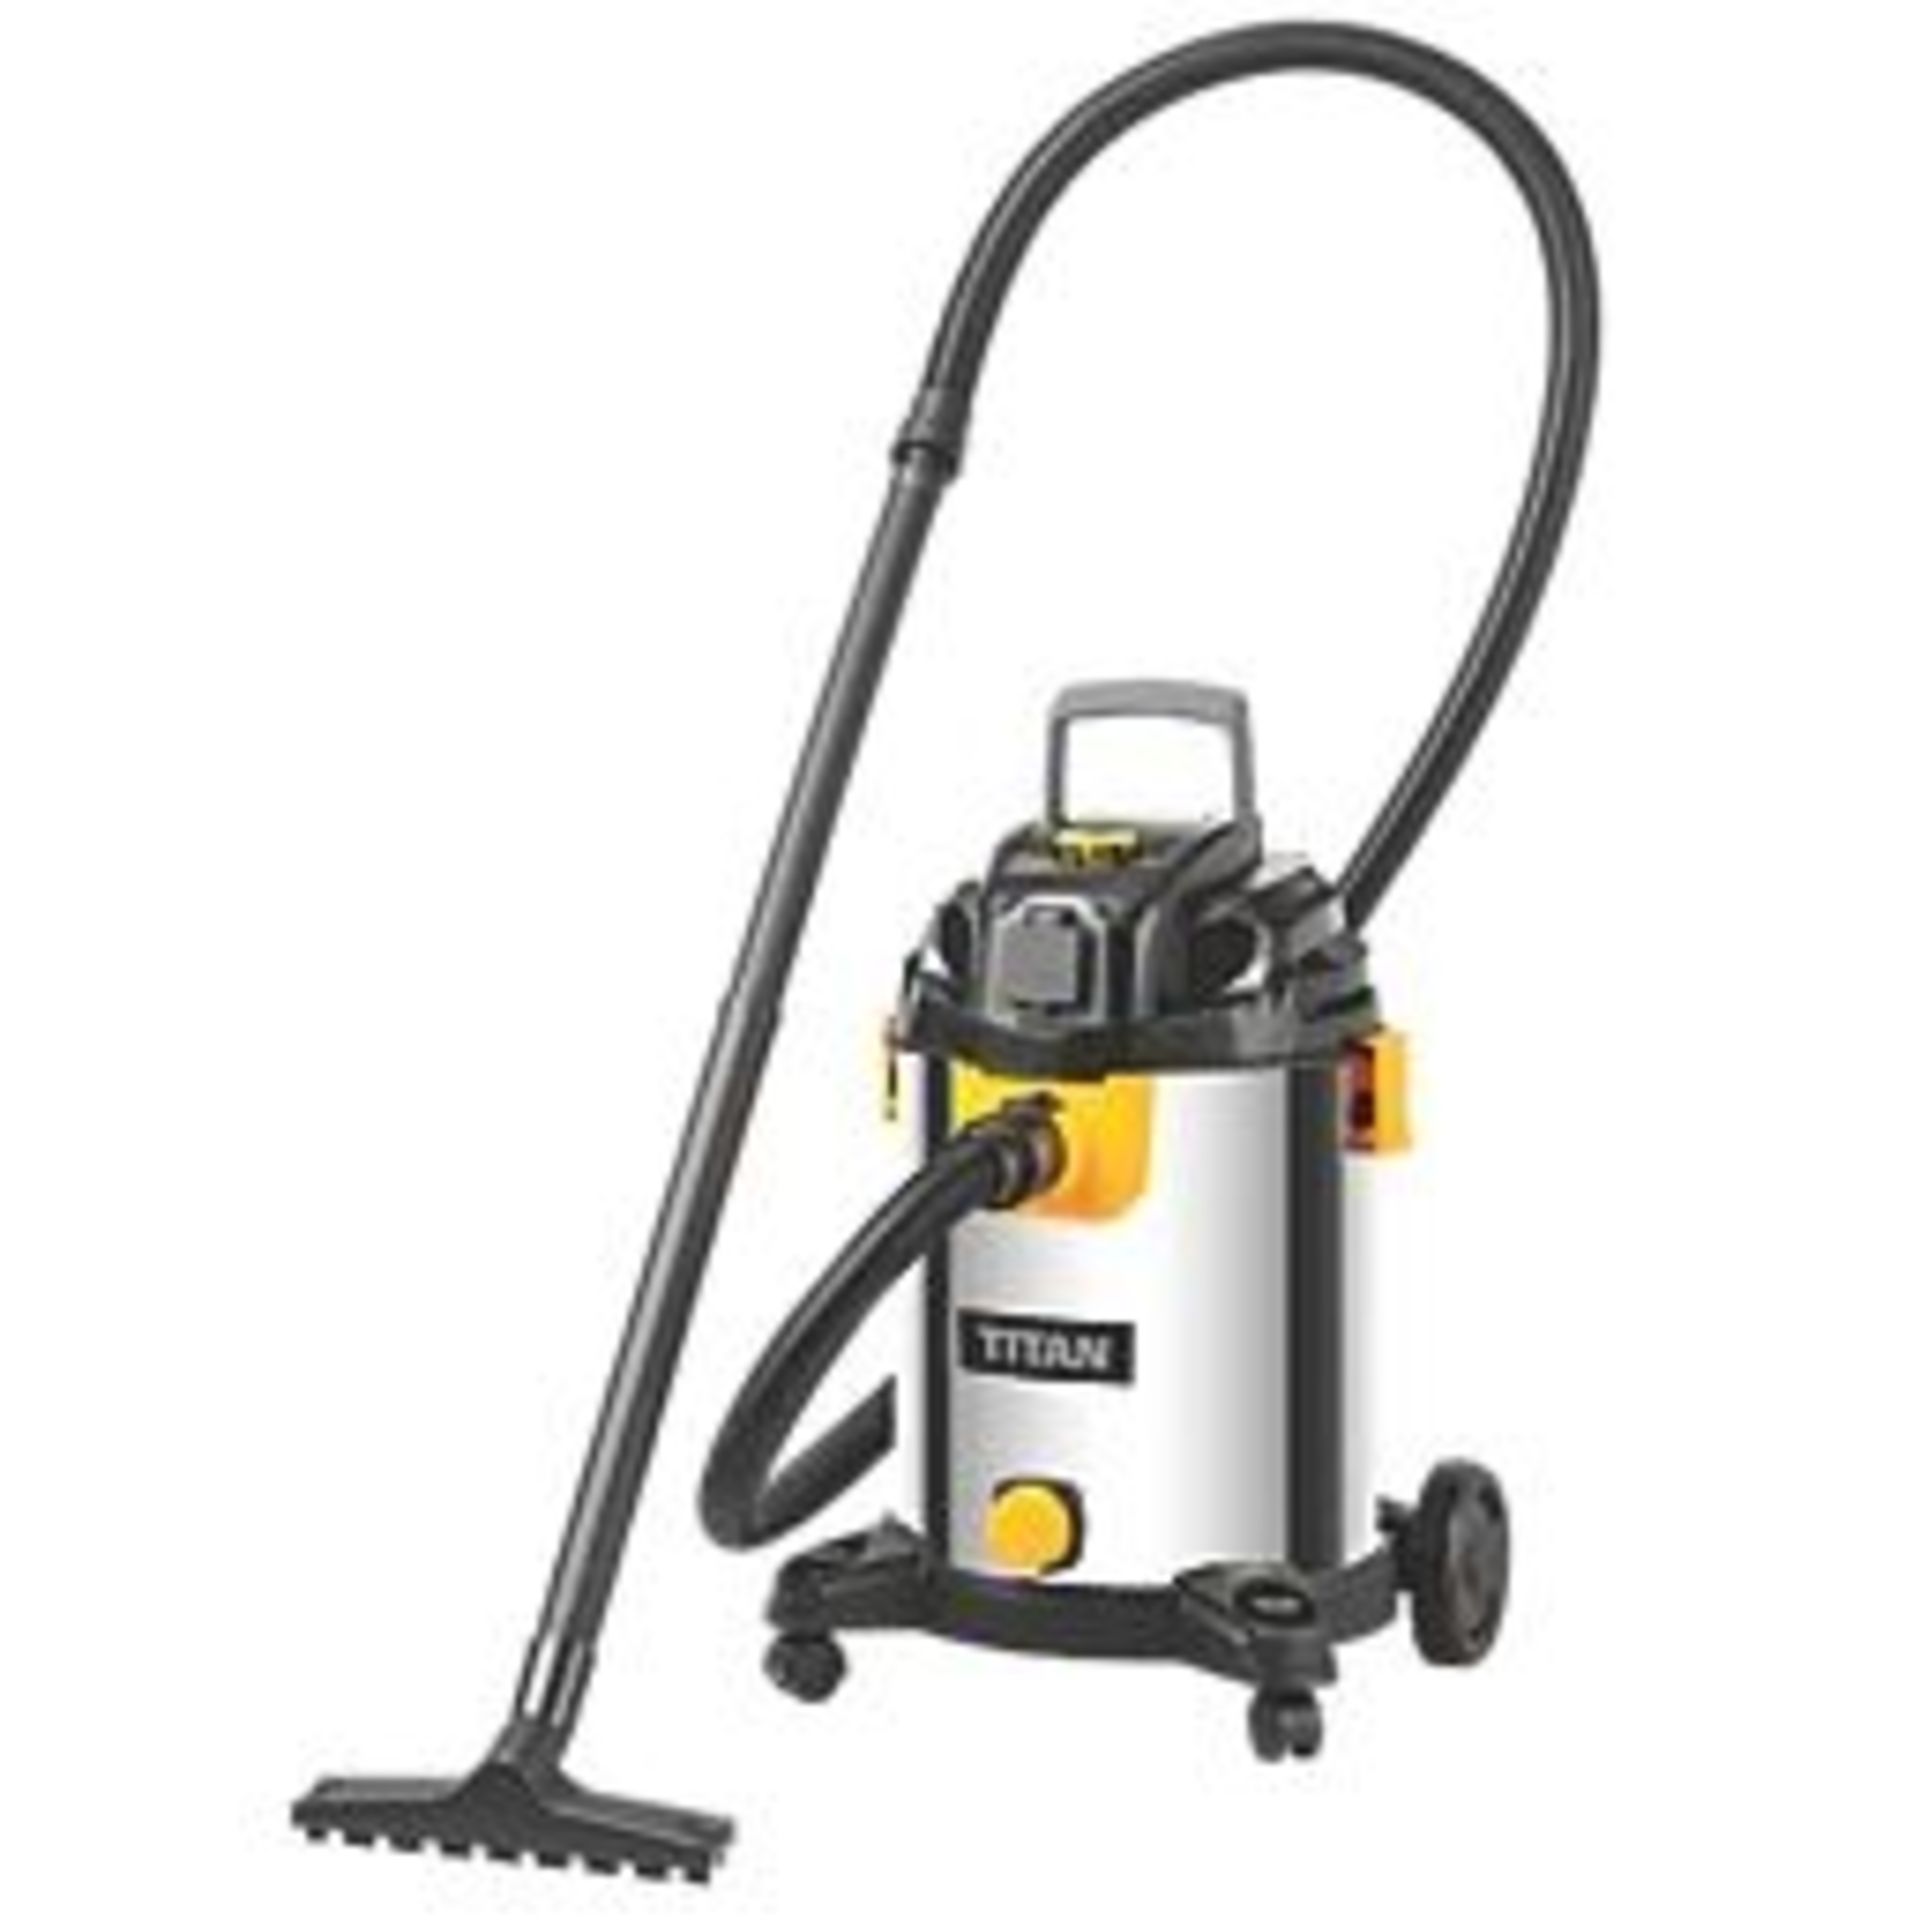 TITAN TTB776VAC 1400W 30LTR WET & DRY VACUUM 220-240V. - P5. Wet and dry vacuum with power take-